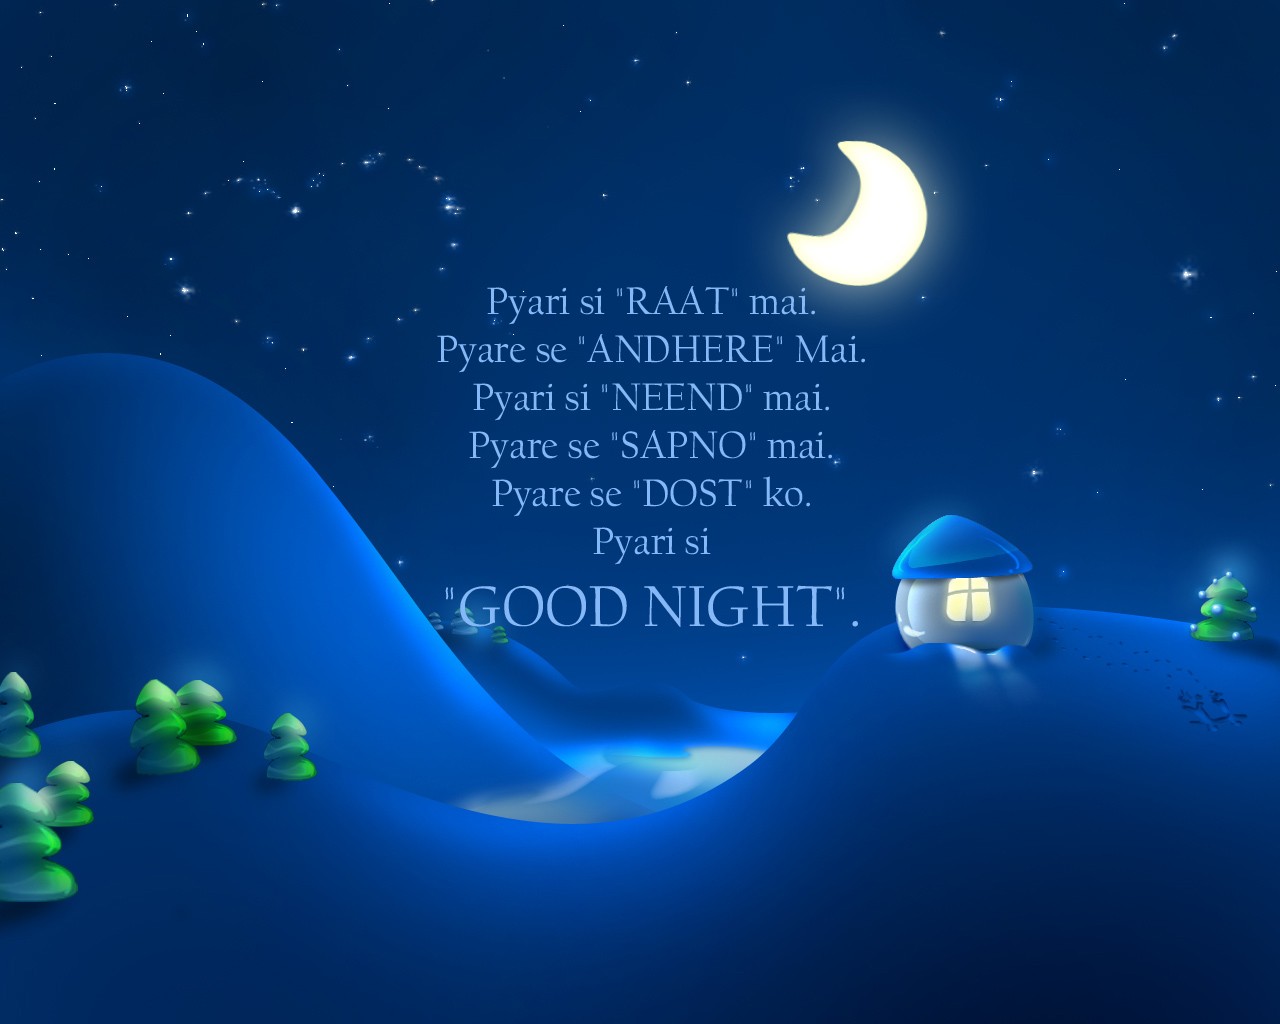 Romantic Good Night Wallpapers Hd Free Good Night Wide Desktop Background Wallpapers  Wallpaper Sites For Mobile Facebook Iphone Pc Download Pictures With Quotes  Apps Romantic Mobile Phone Wallpapers  फट शयर